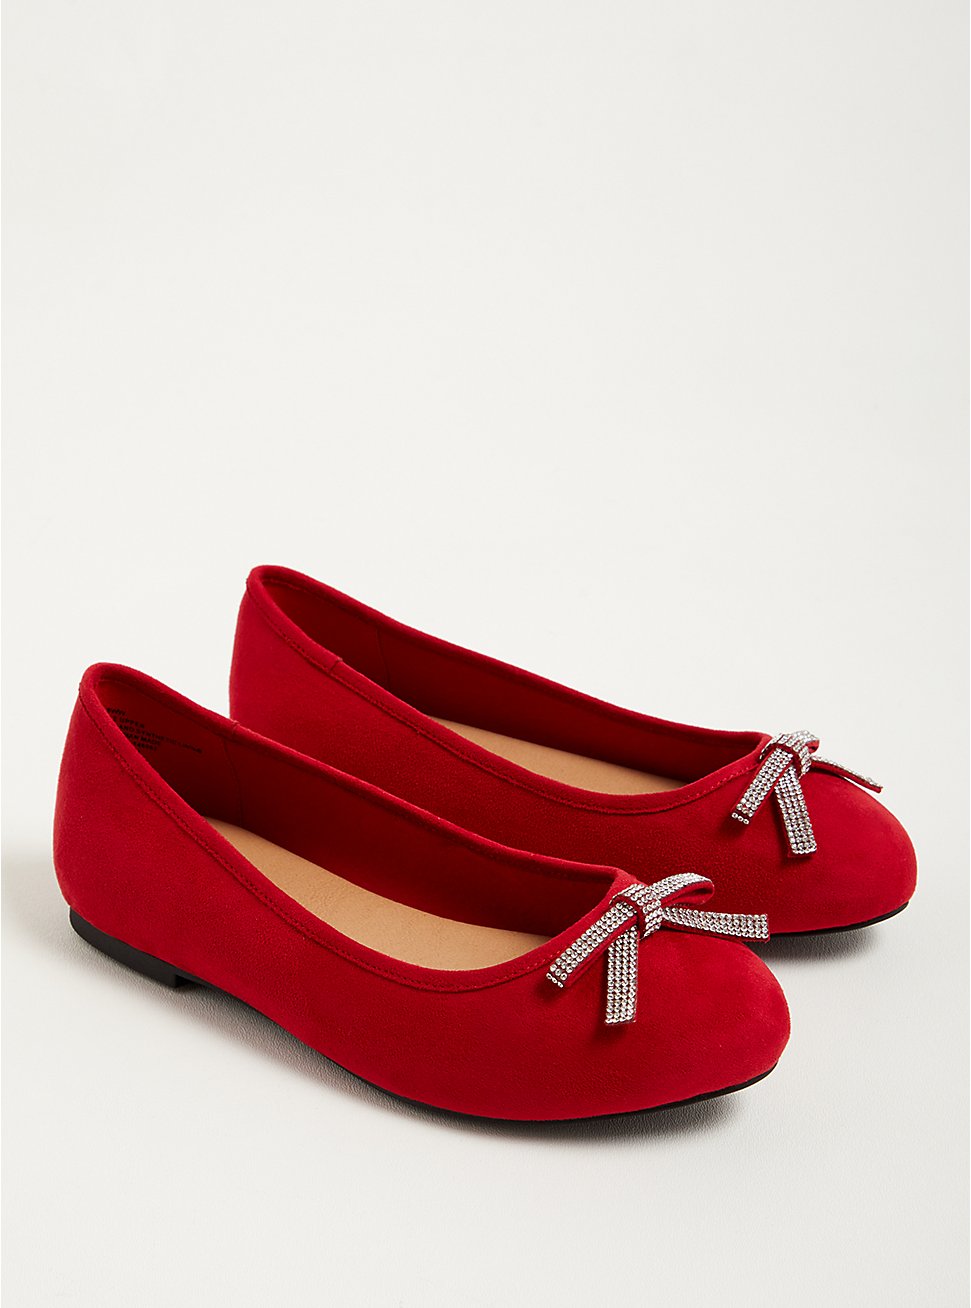 Bow Ballet Flat - Red Faux Suede (WW), RED, hi-res